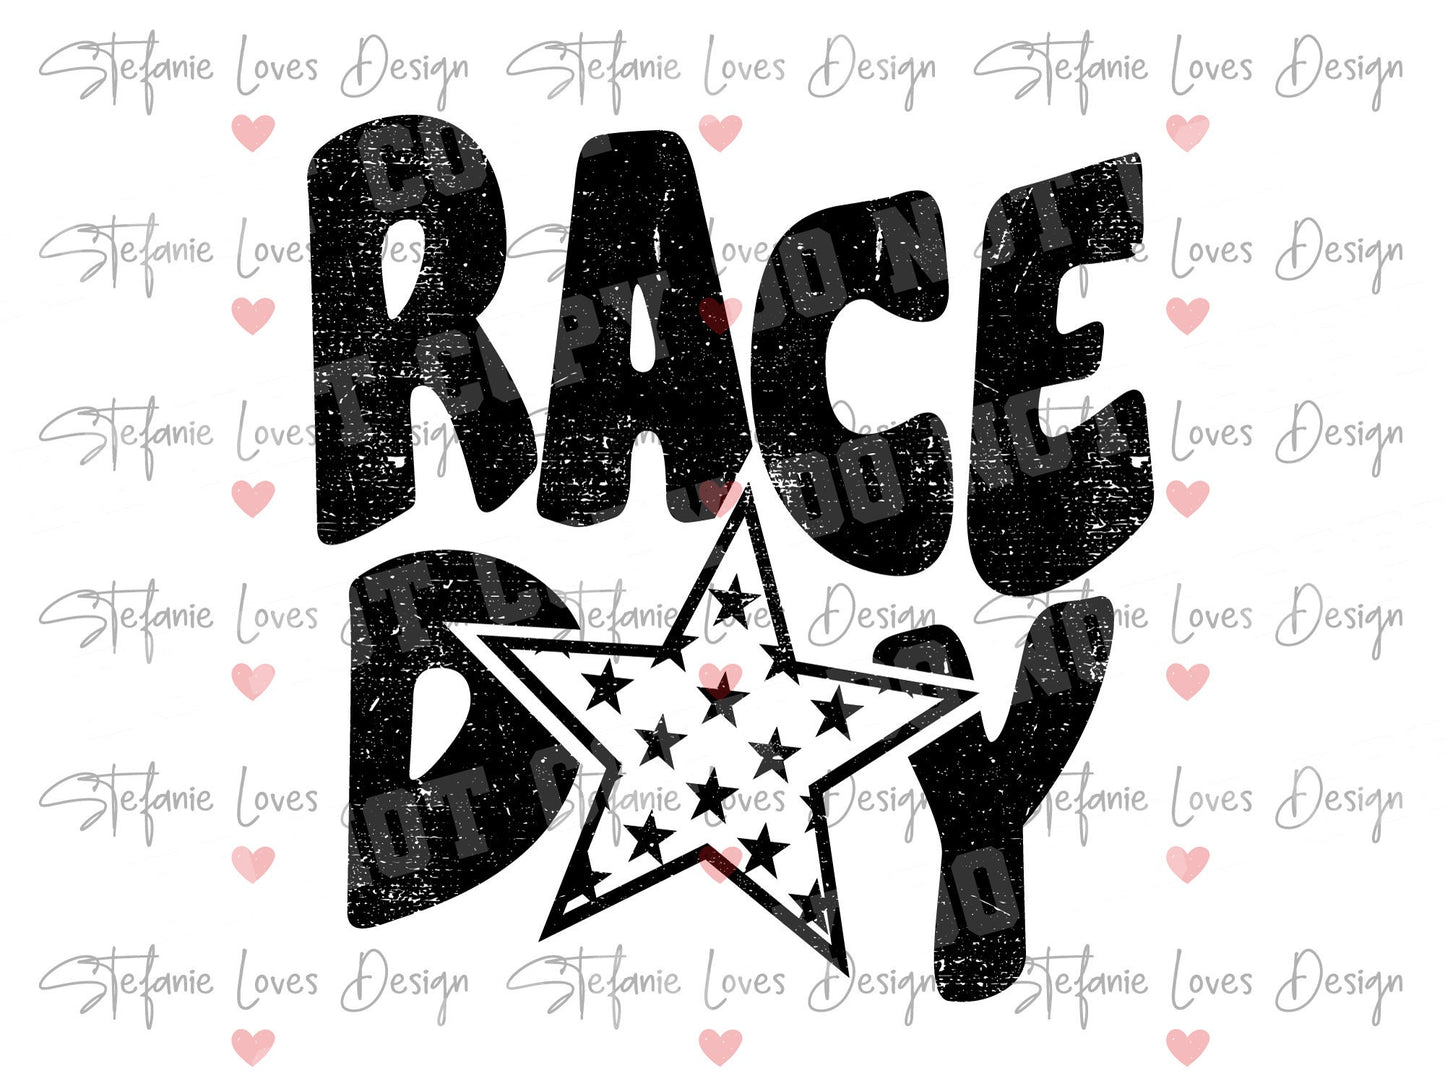 Race Day Distressed png, Distressed Running Race Day, Cross Country Digital Design